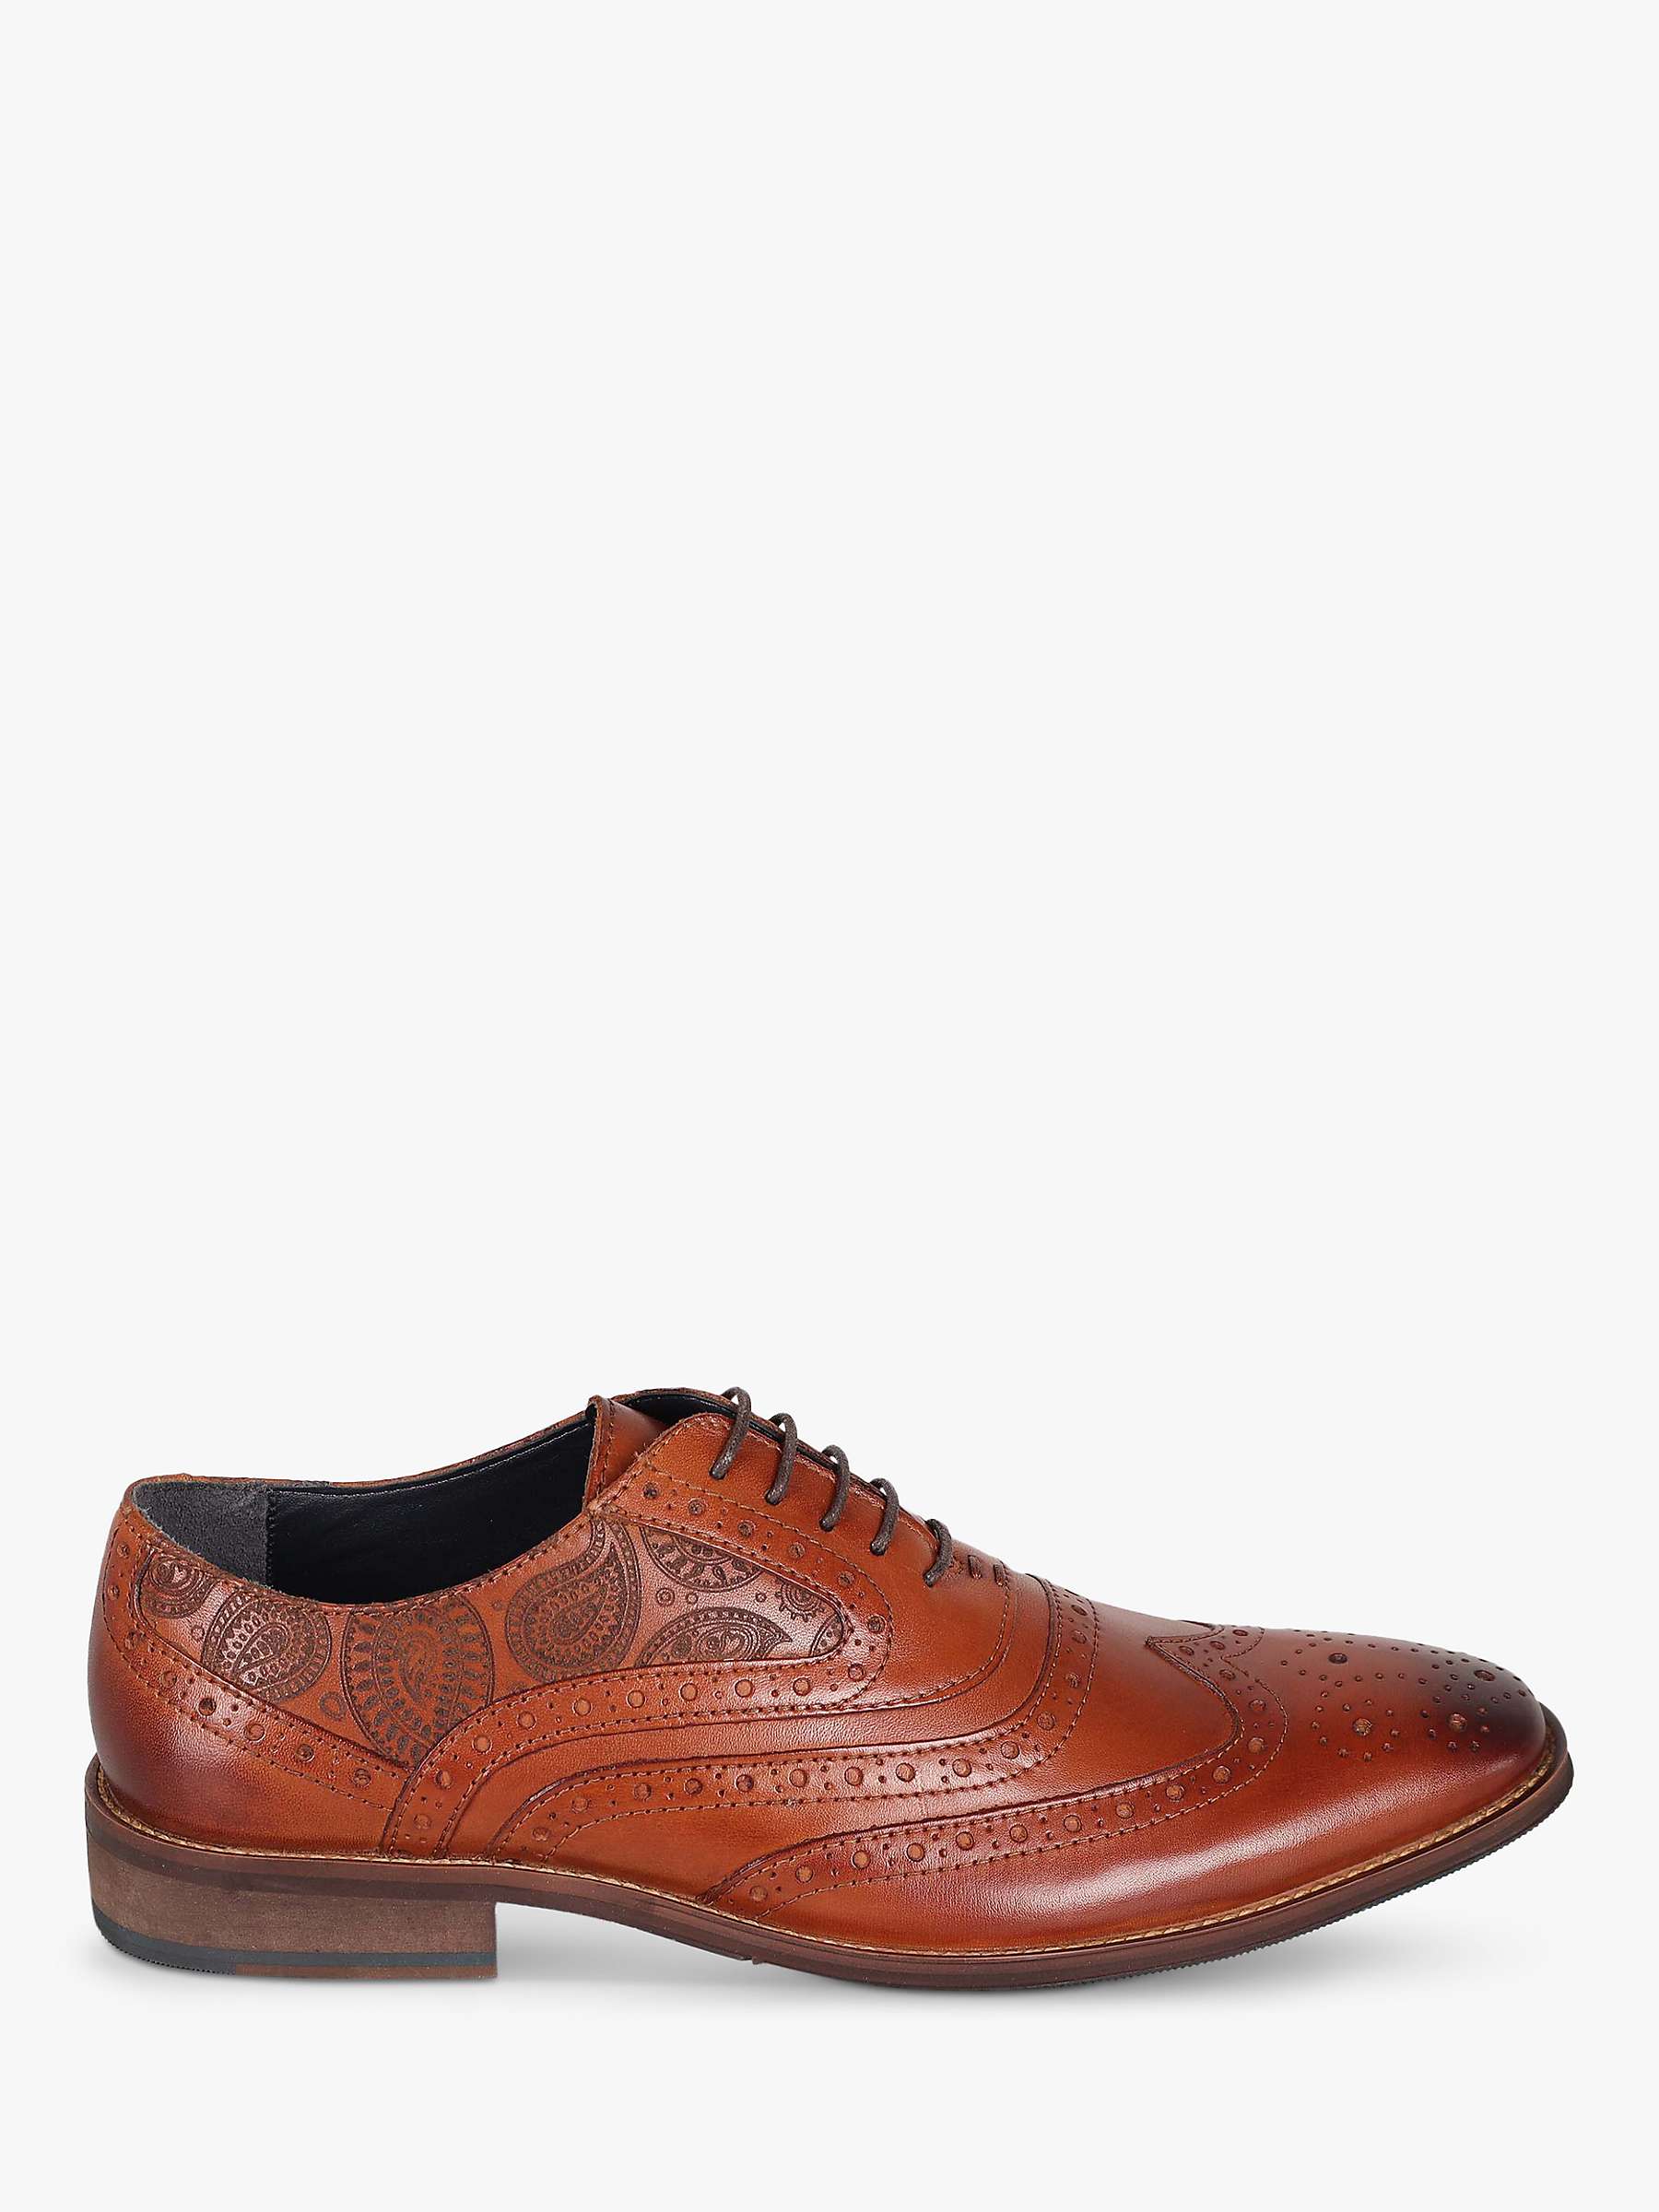 Buy Silver Street London Amen Collection Cork Leather Brogues, Tan Online at johnlewis.com